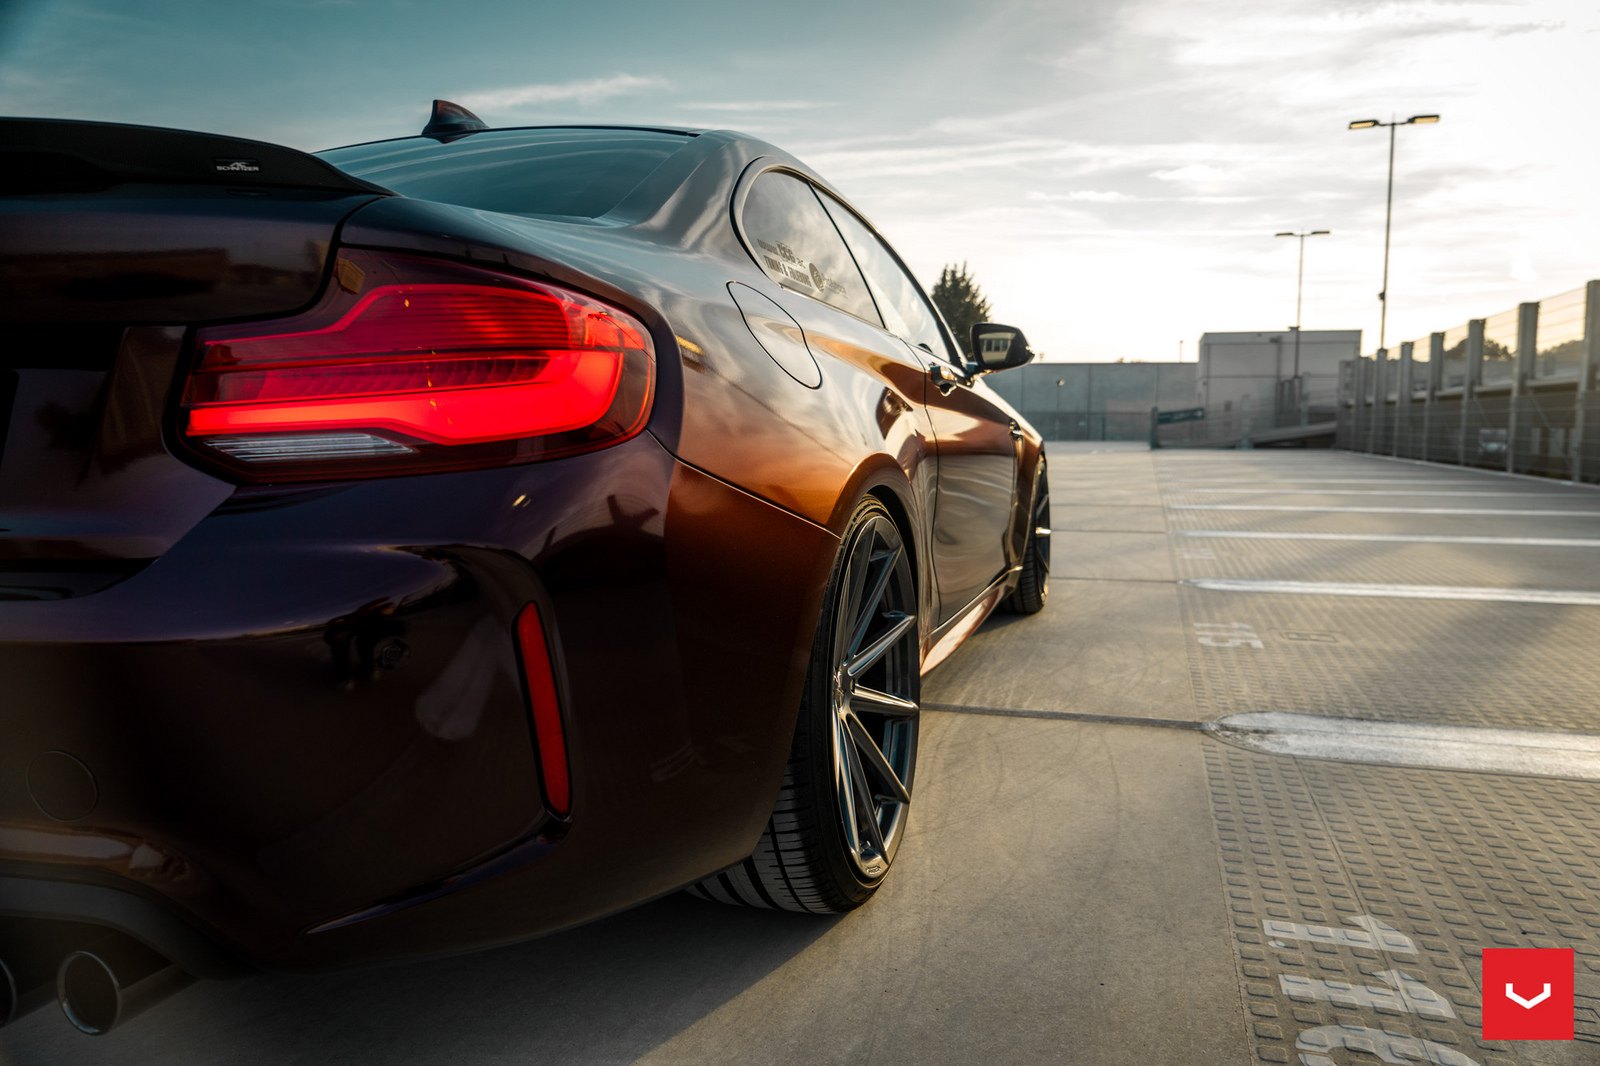 Red LED Taillights on Burgundy BMW 2-Series - Photo by Vossen